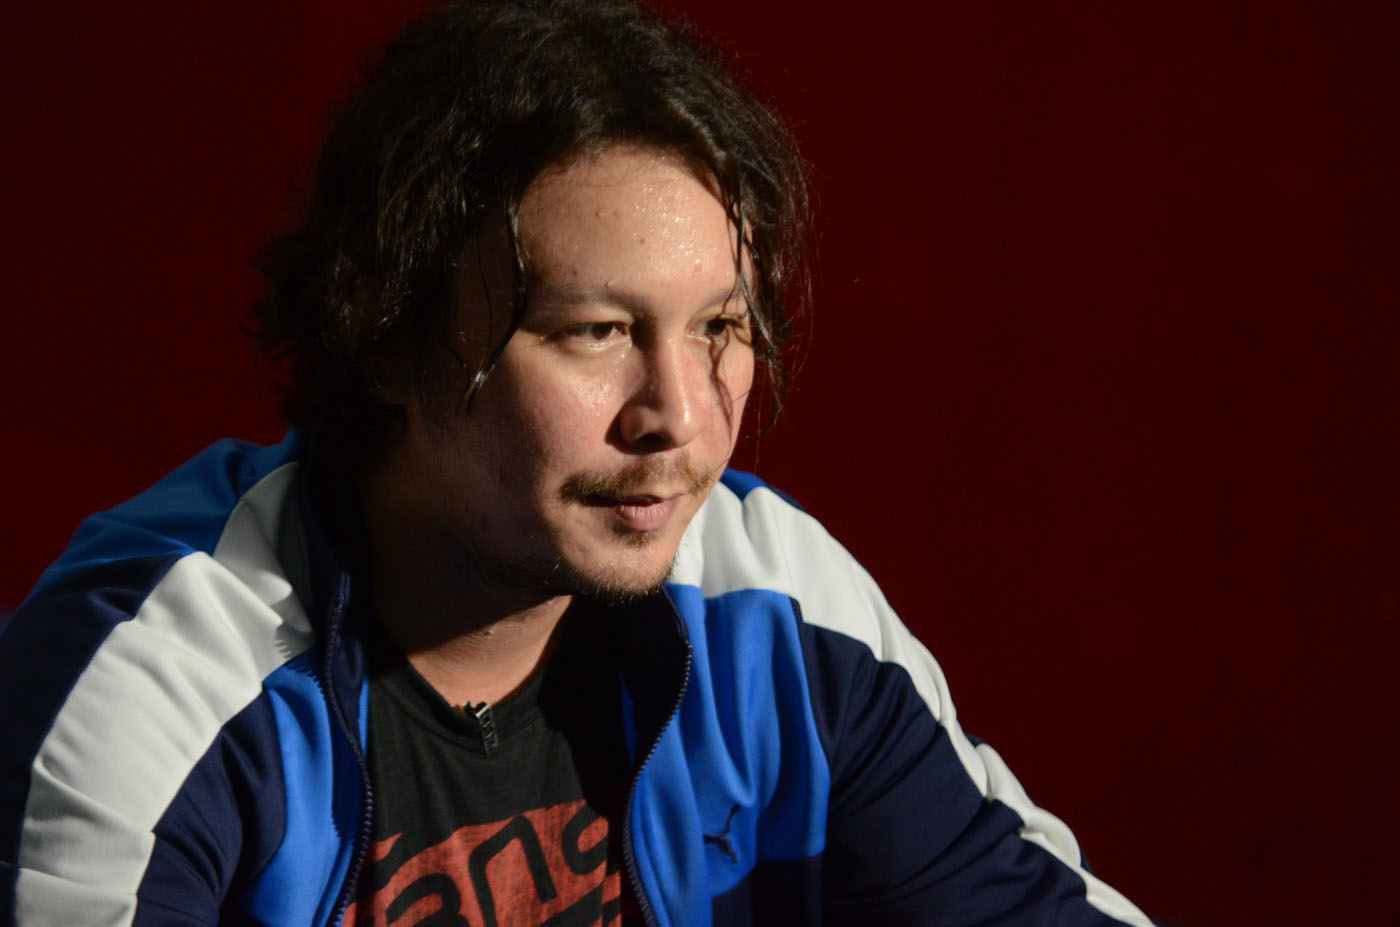 APOLOGY. Baron Geisler apologizes to Ping Medina, but expresses his disappointment with the director of the movie. File photo by Alecs Ongcal/Rappler  